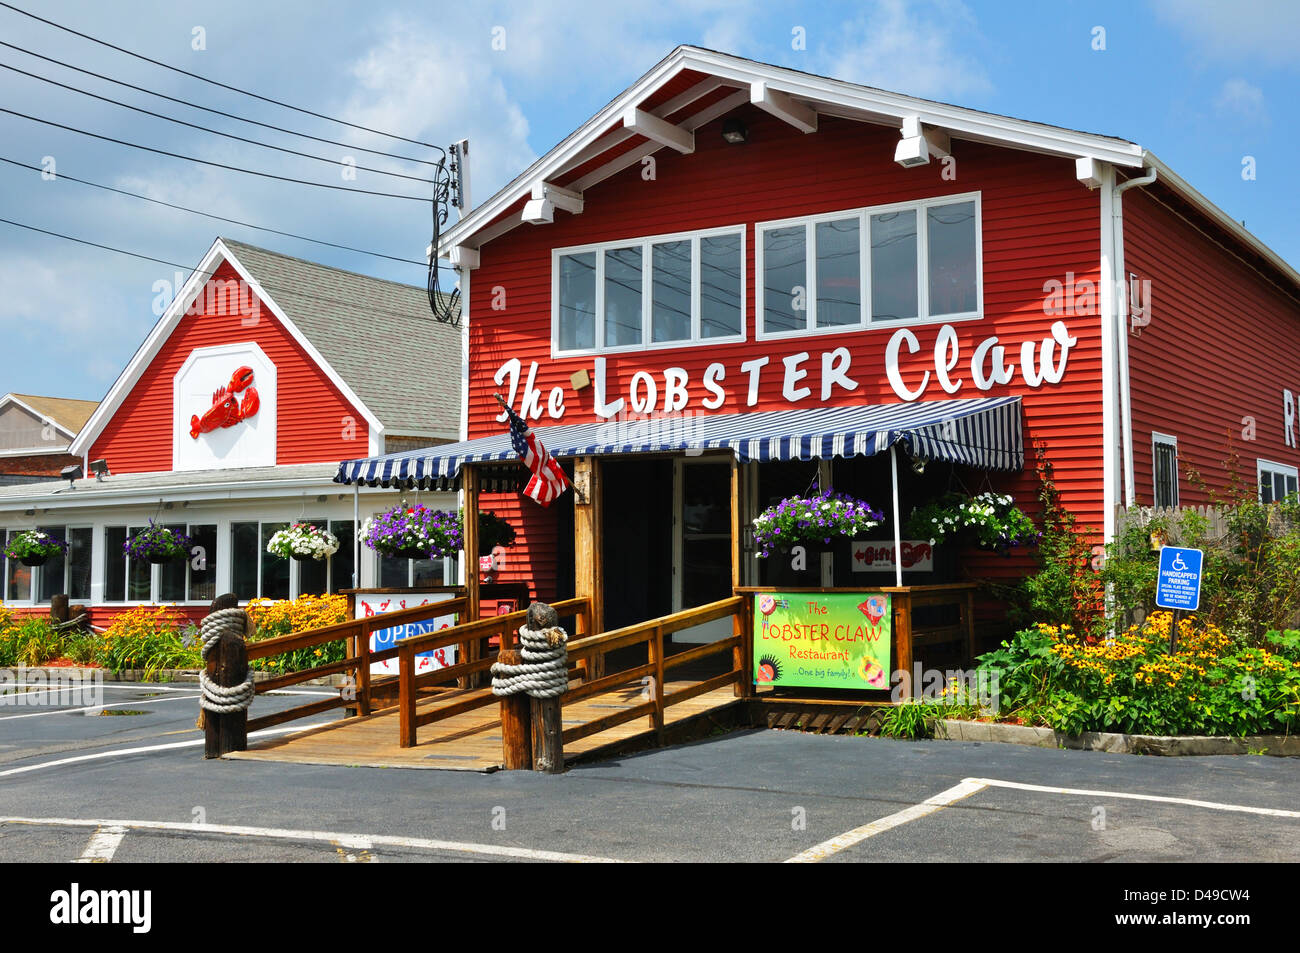 The Lobster Claw Seafood Restaurant, Orleans, Cape Cod, Massachusetts, USA  Stock Photo - Alamy